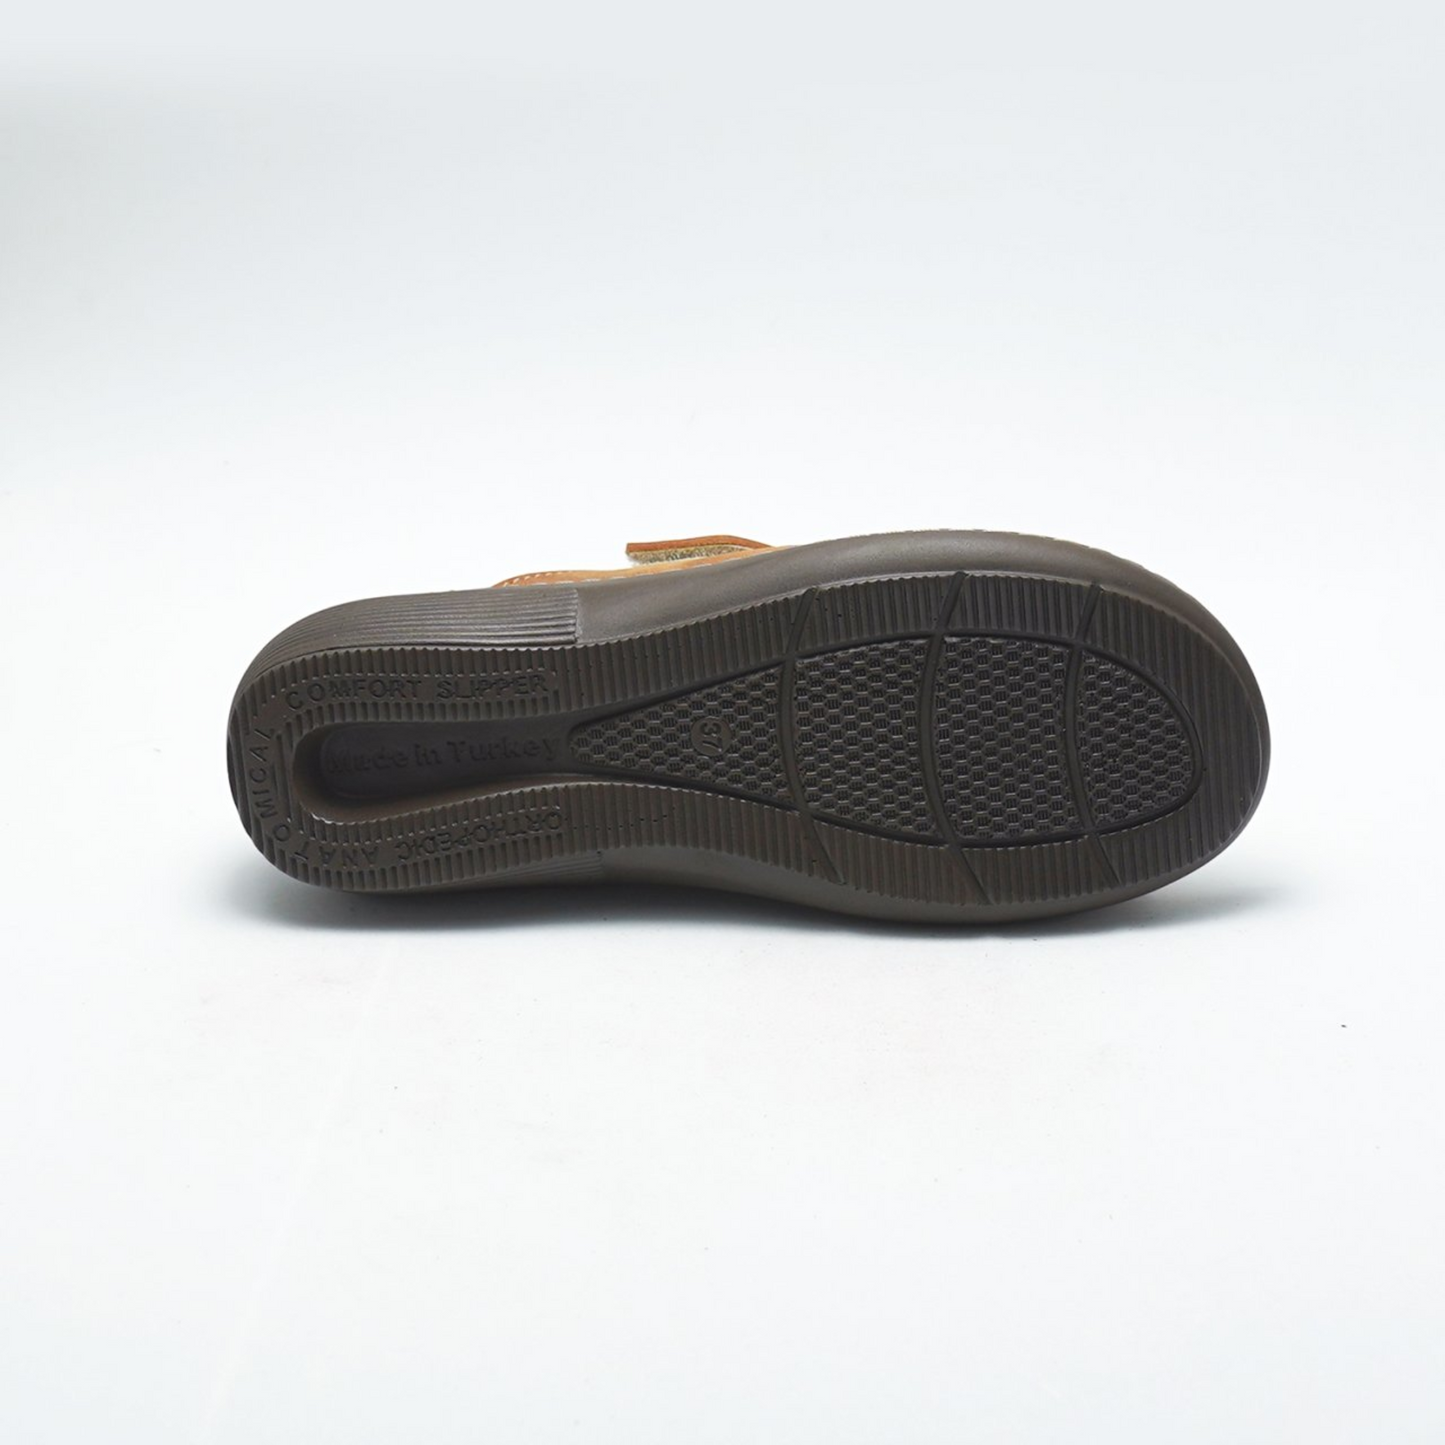 orthotic slippers